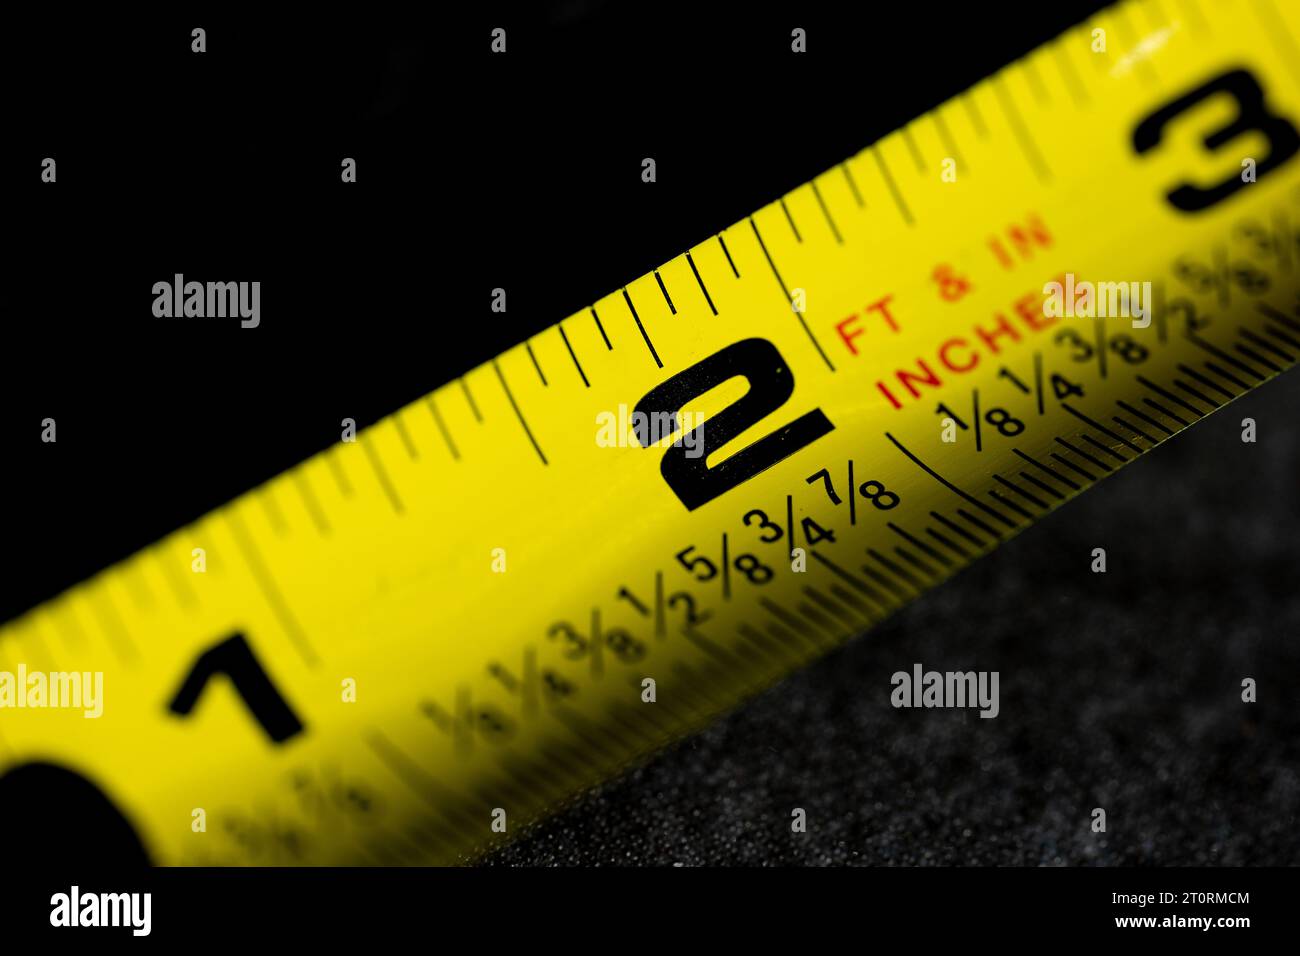 Macro Photograph of a Tape Measure with Dark Background Stock Photo